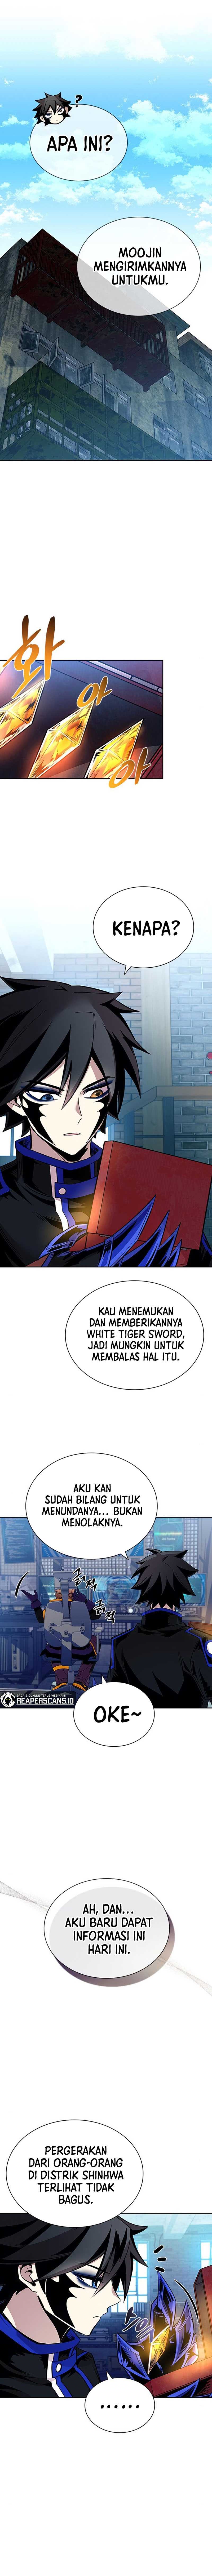 kill-to-villain-indo Chapter chapter-76